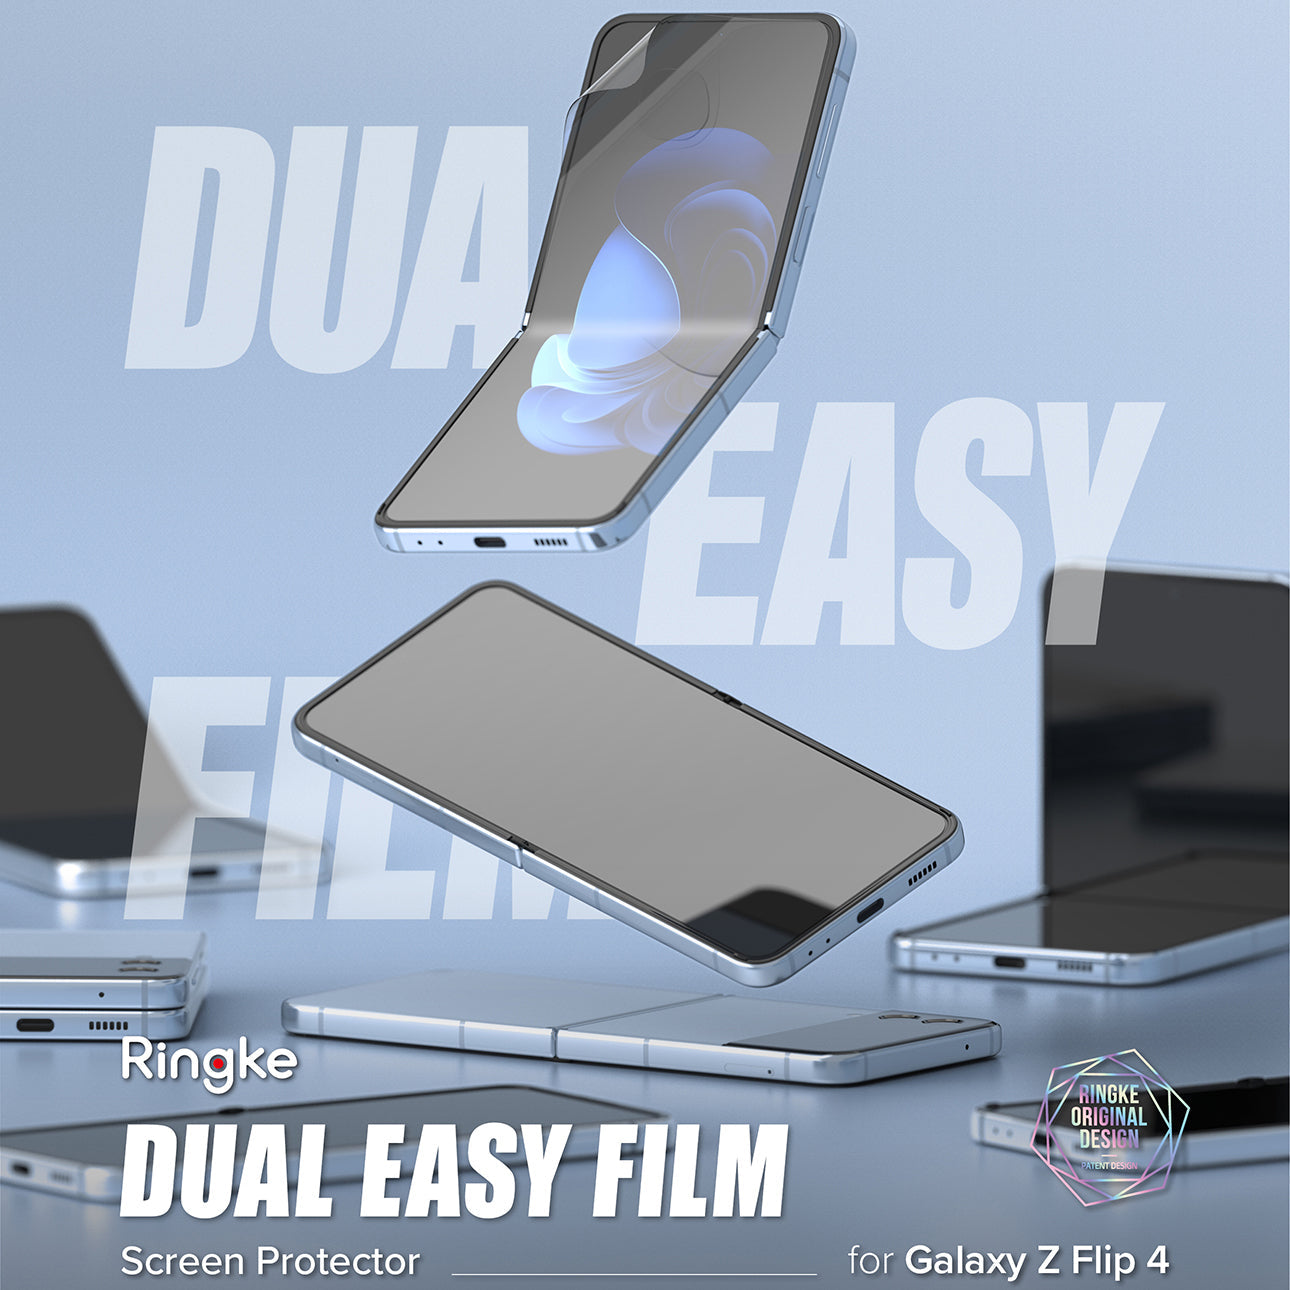 Ringke ﻿2pcs Dual Easy Screen Protector for Samsung Galaxy Z Flip 4 Screen Protectors Ringke 